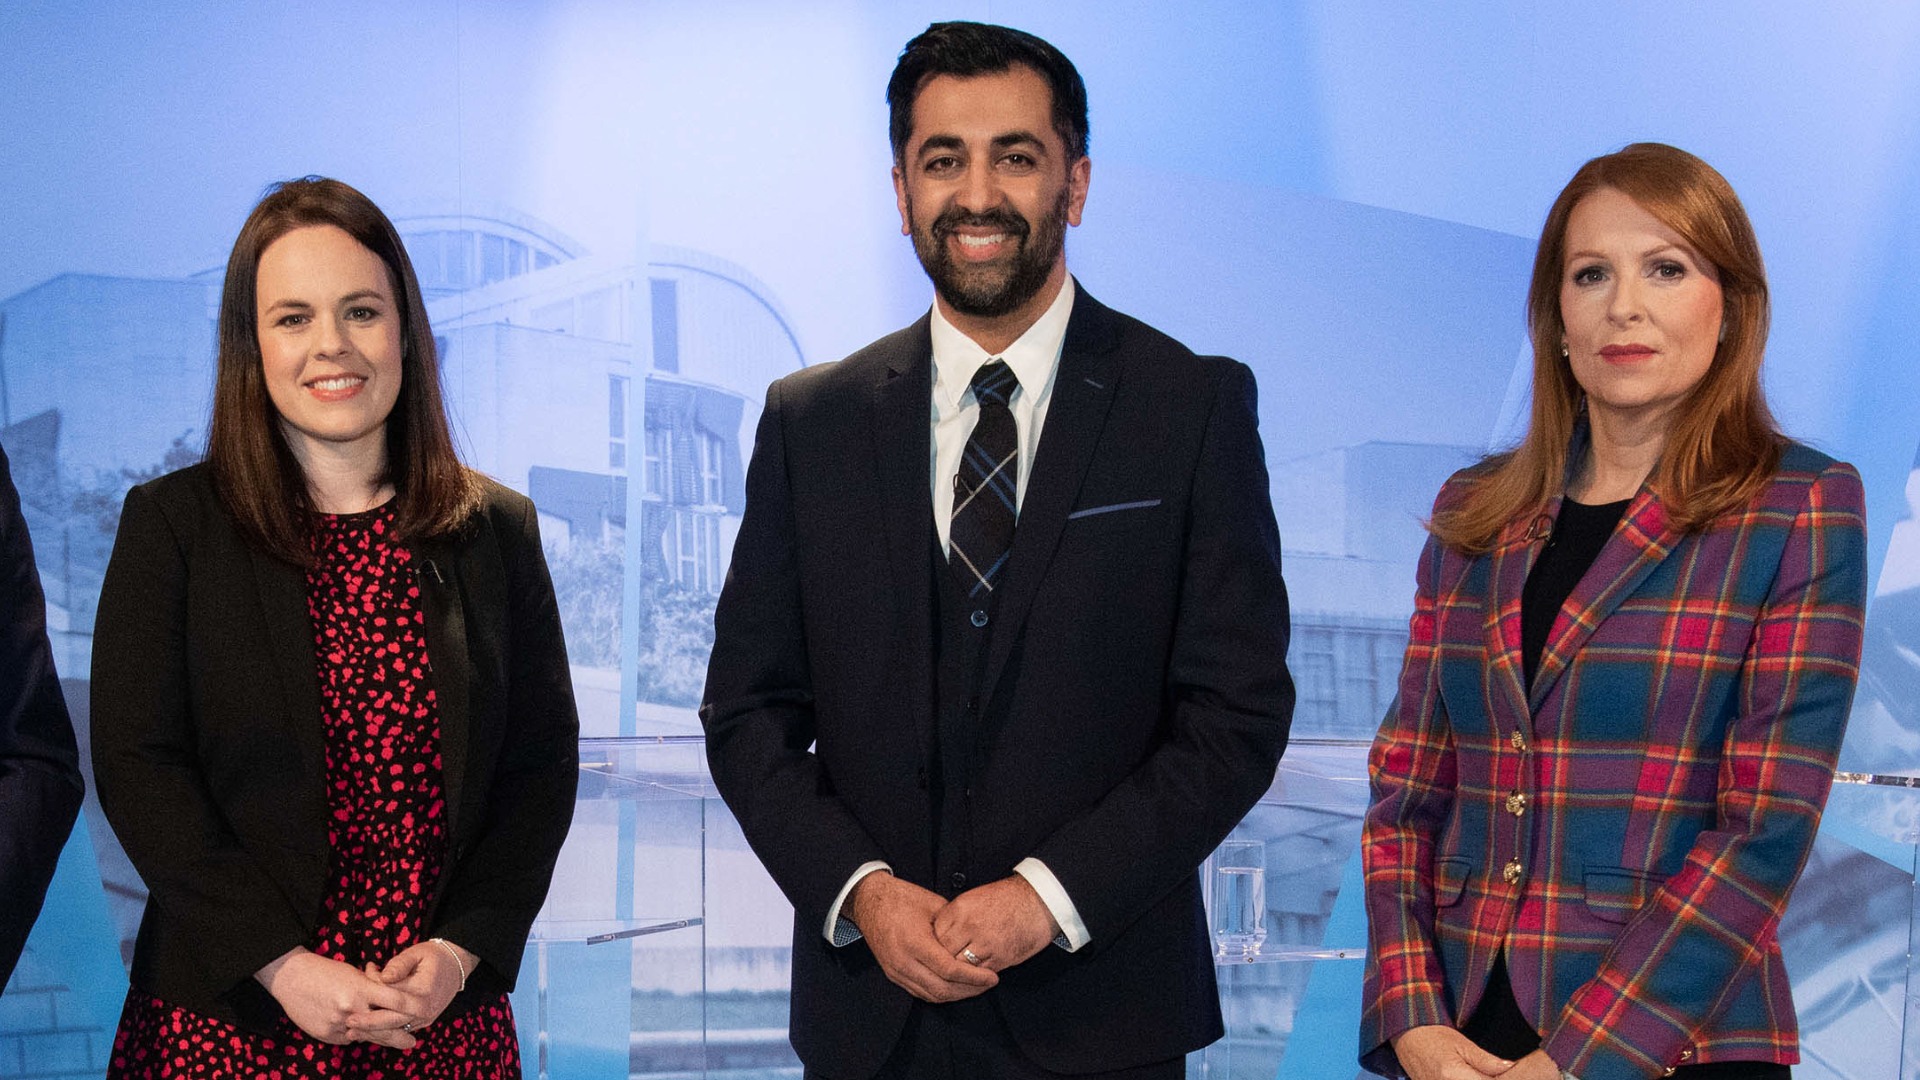 Humza Yousaf is running against Kate Forbes and Ash Regan to become Scotland's next First Minister.